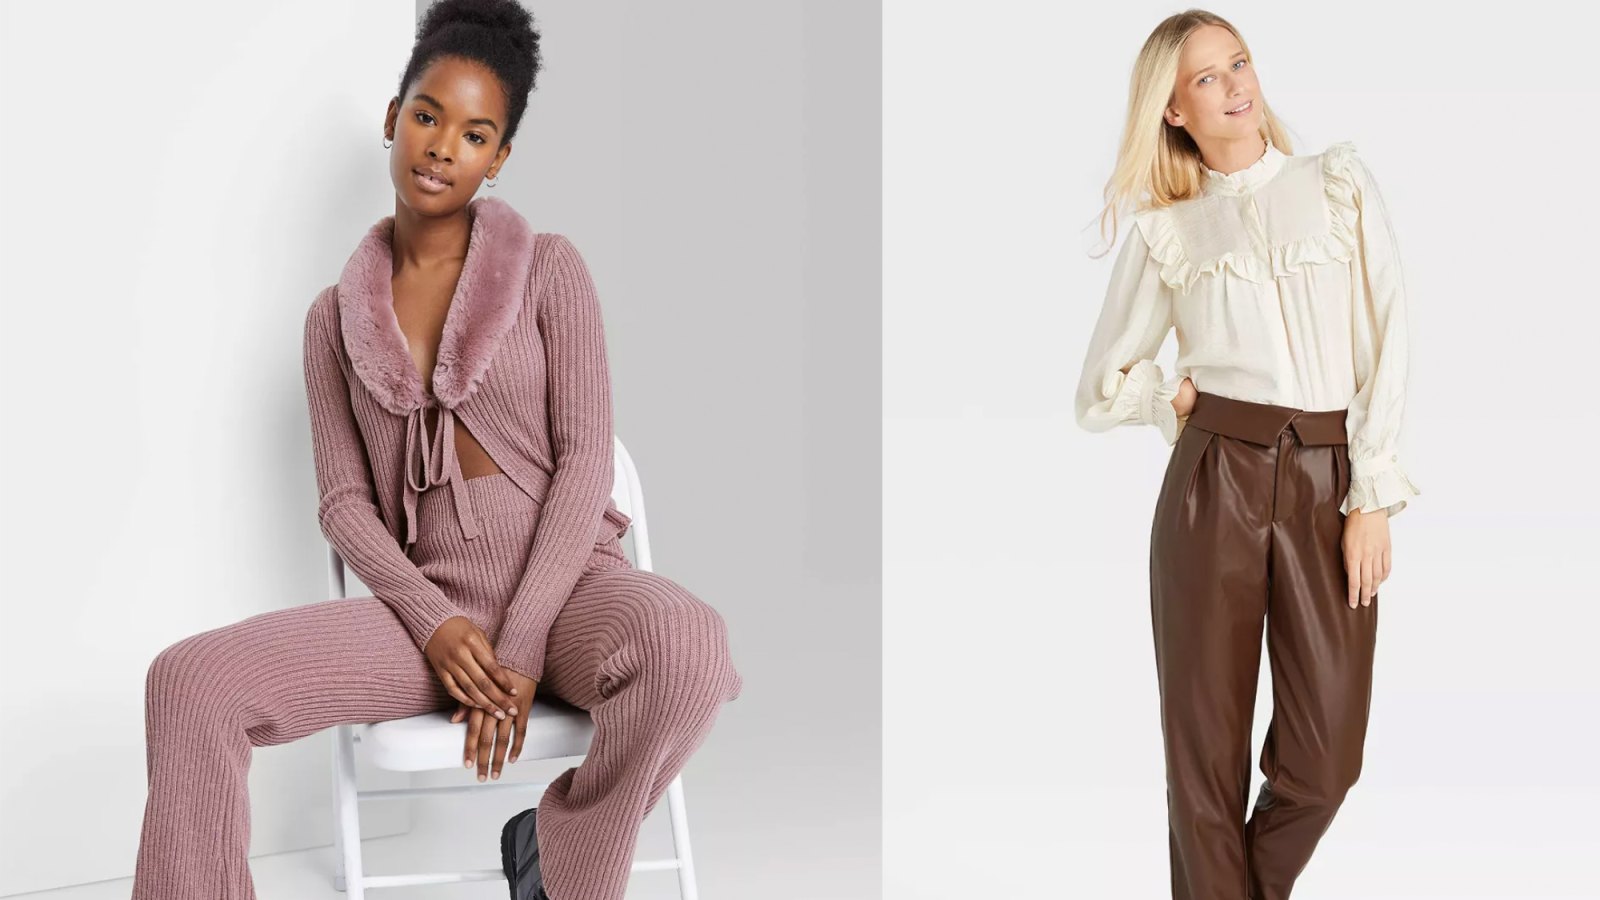 Target's Sale on Women's Clothes Starts at Just $3